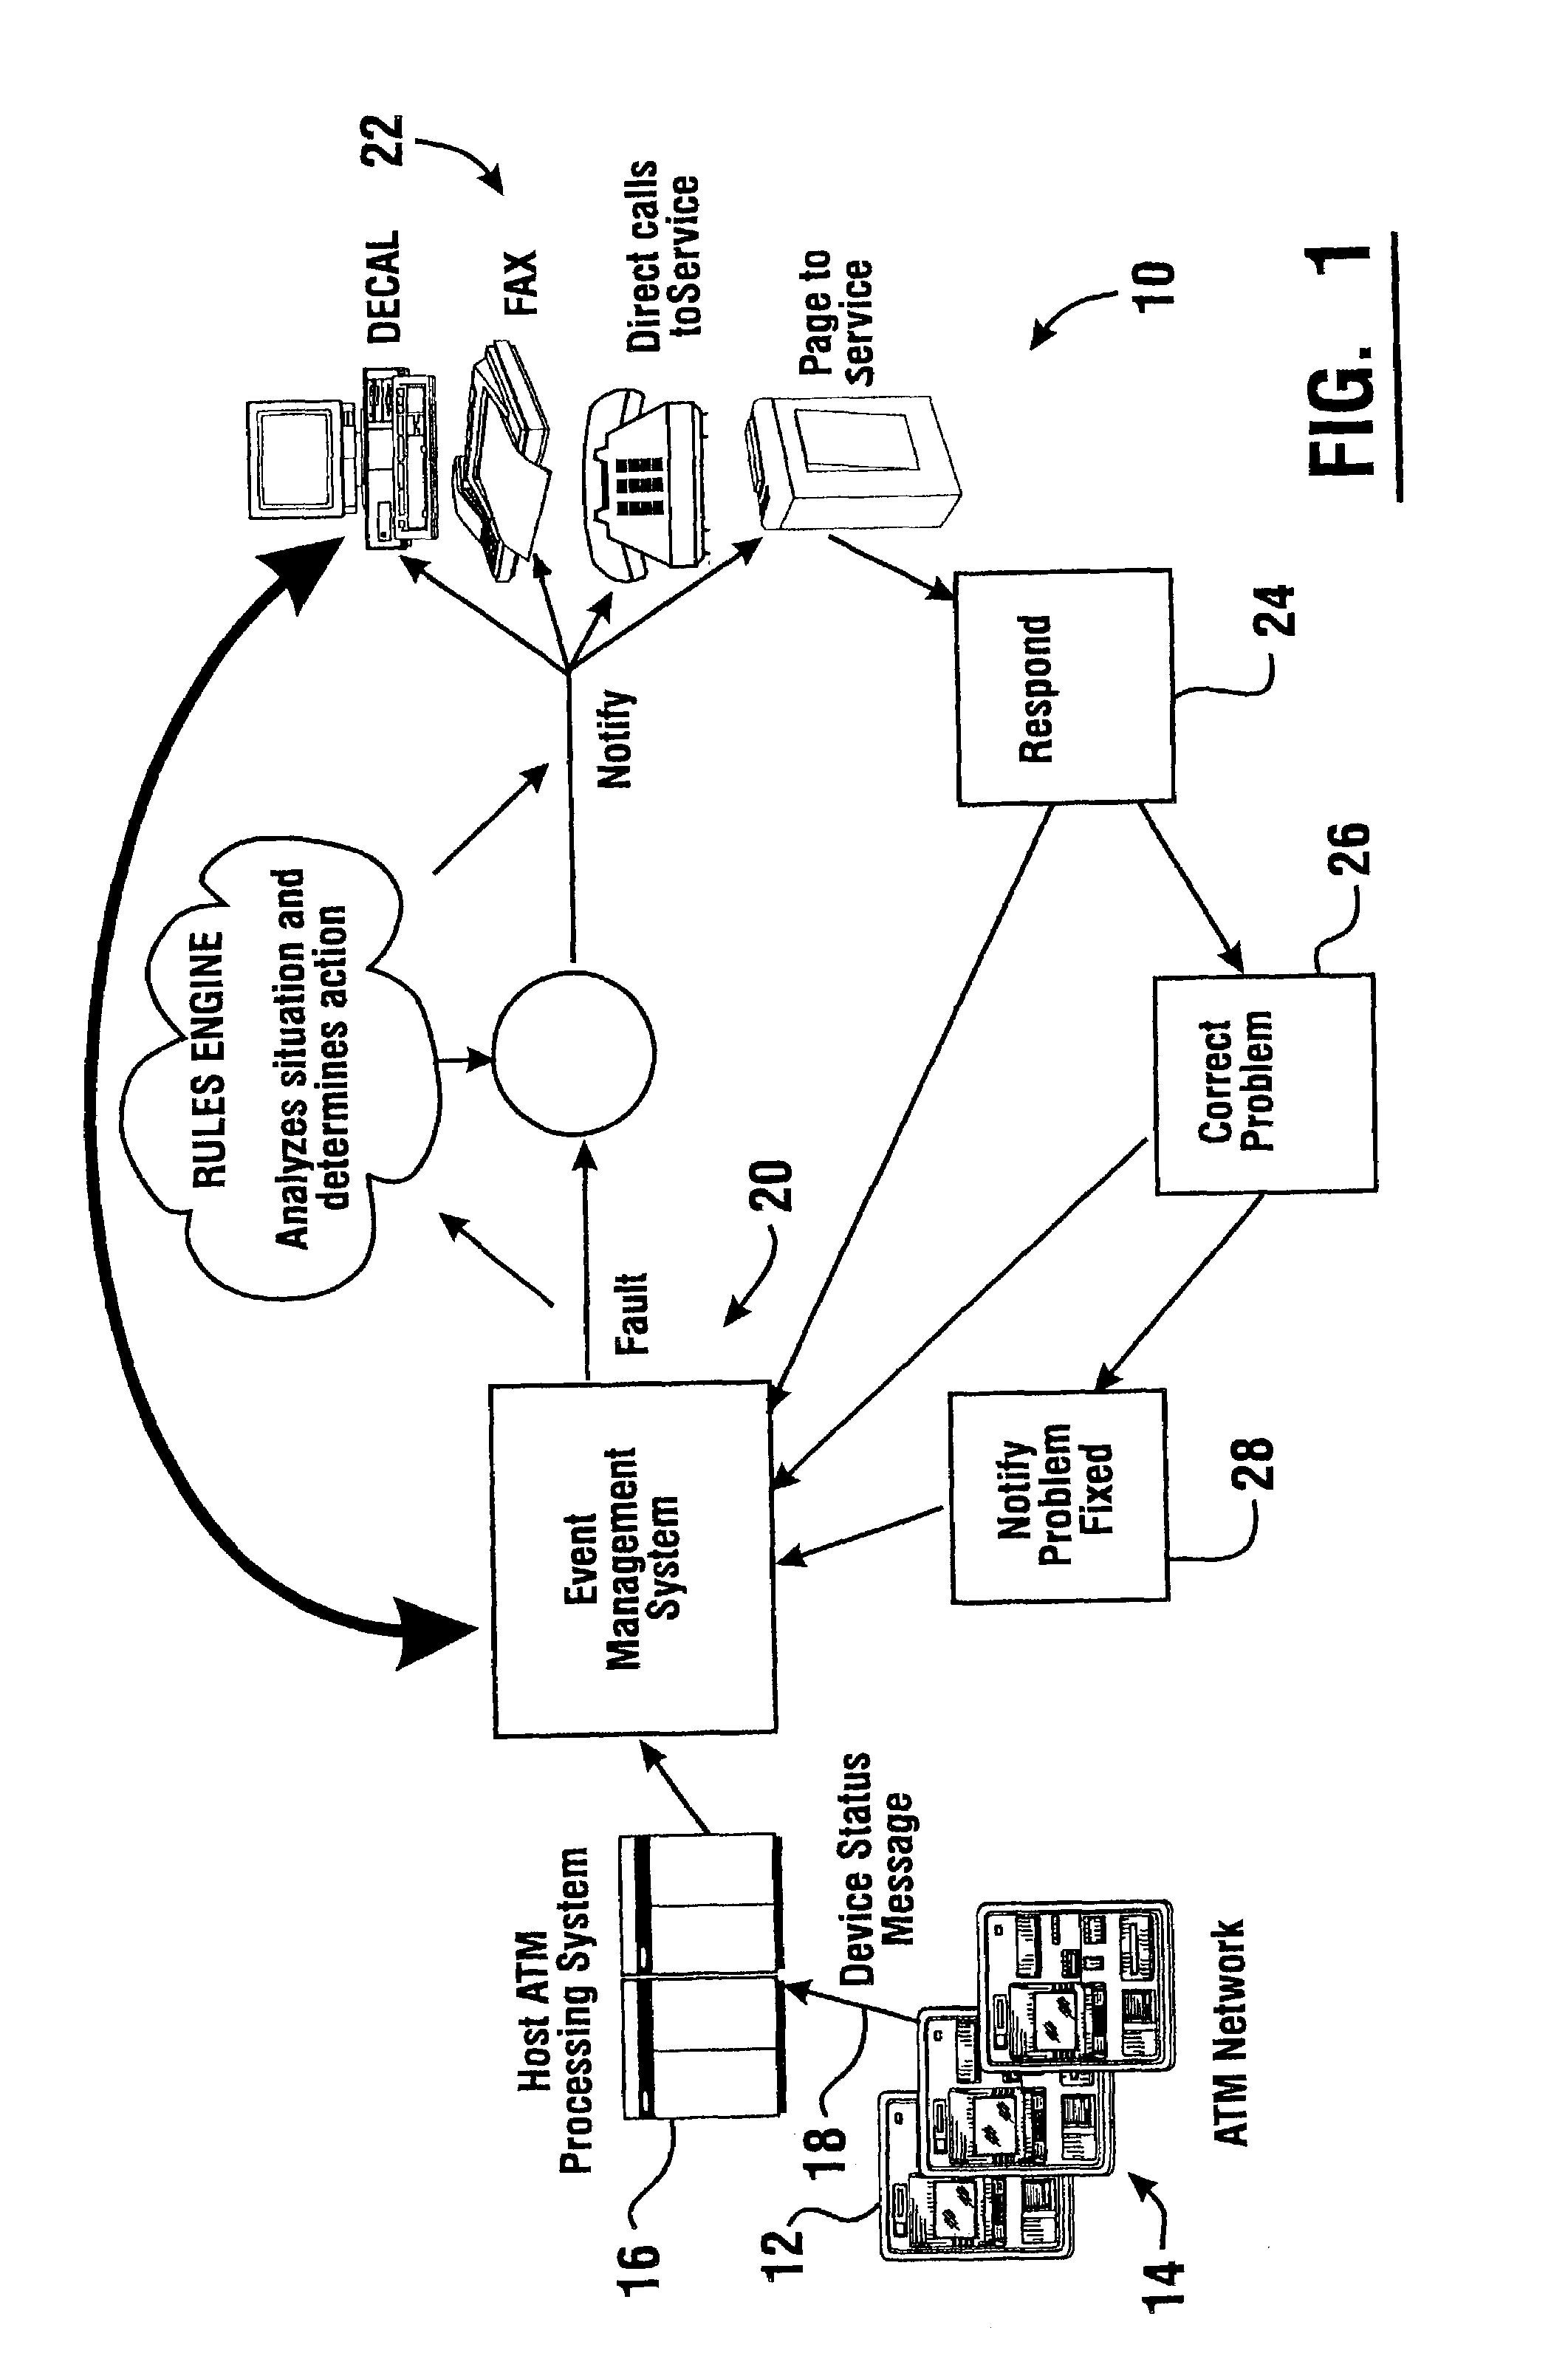 Fault monitoring and notification system for automated banking machines